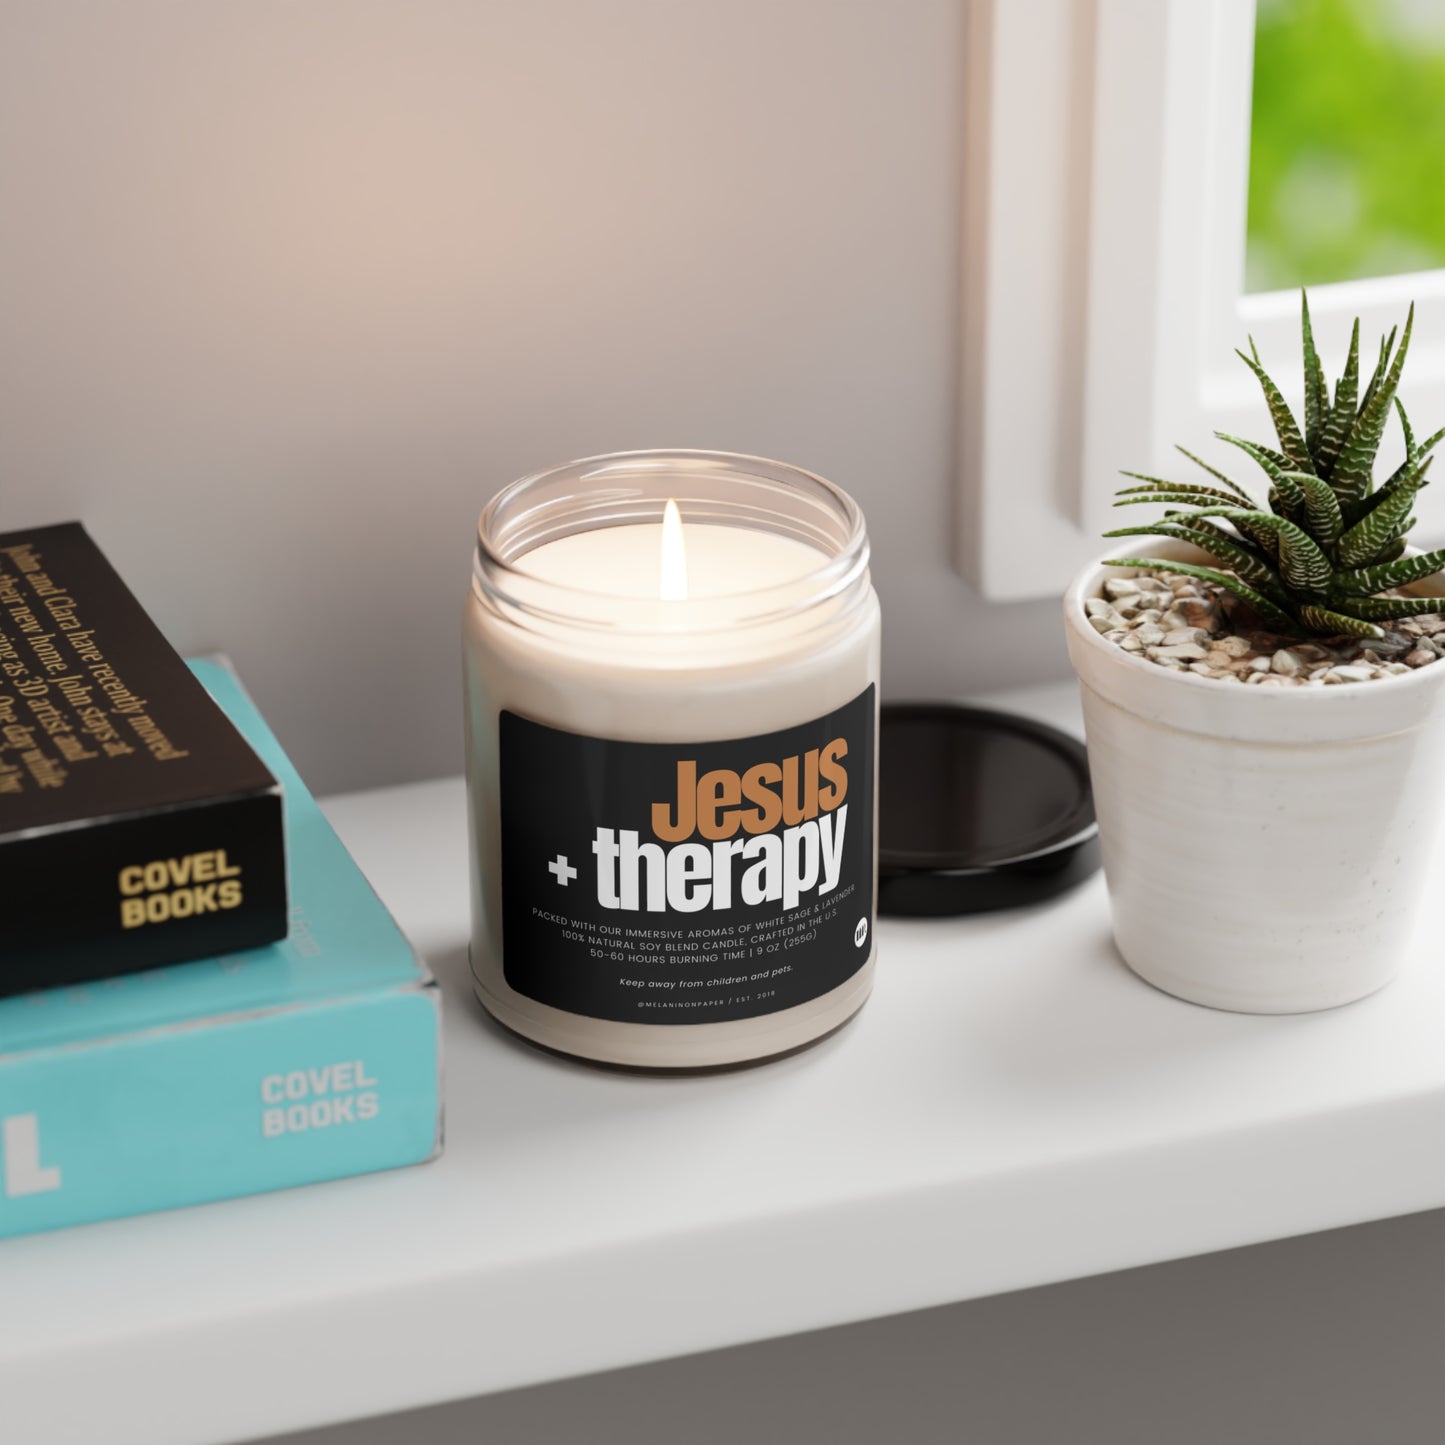 "Jesus + therapy" Scented Soy Candle, 9oz